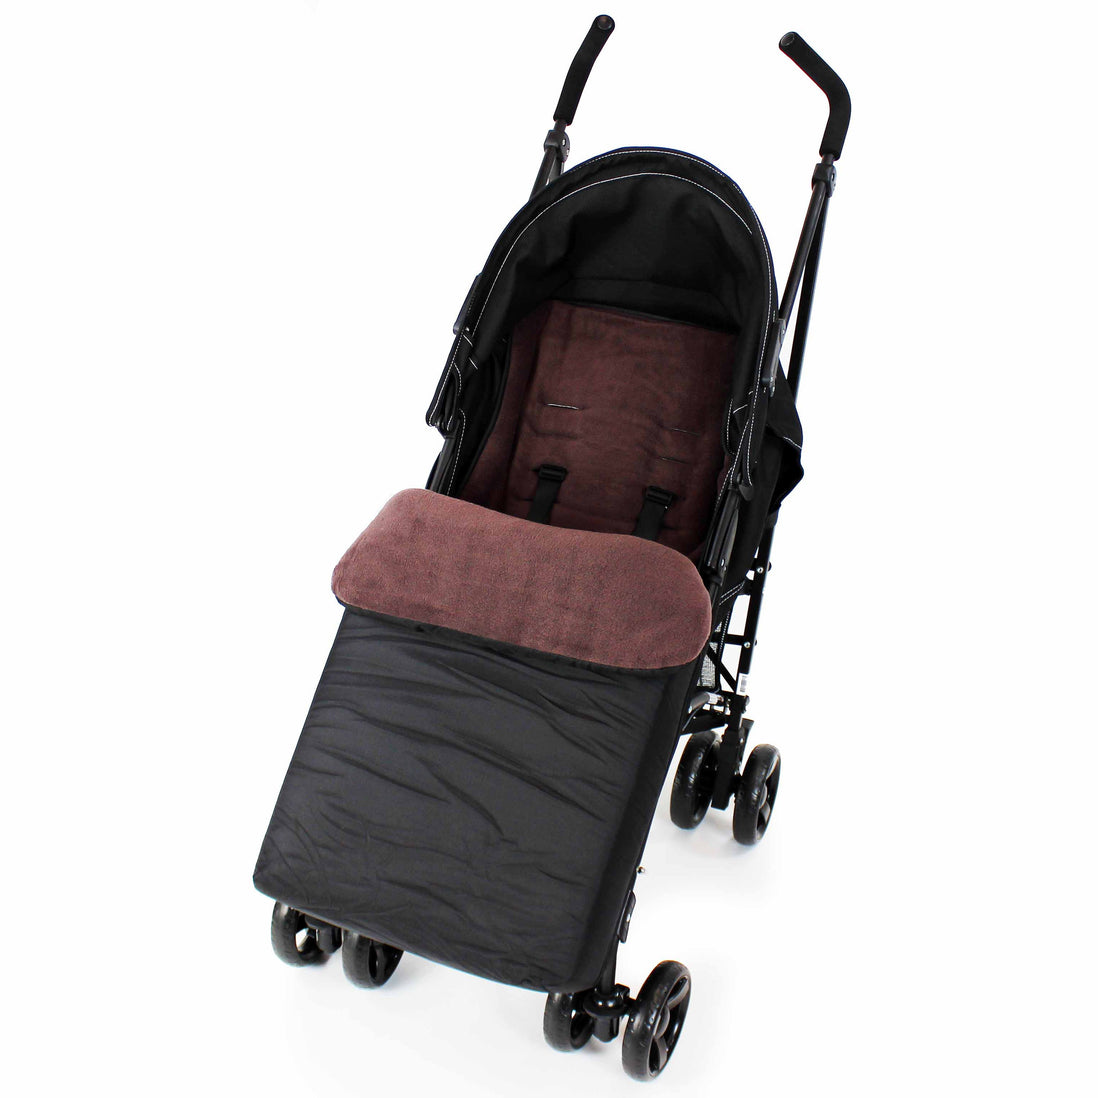 mamas and papas cruise pushchair package